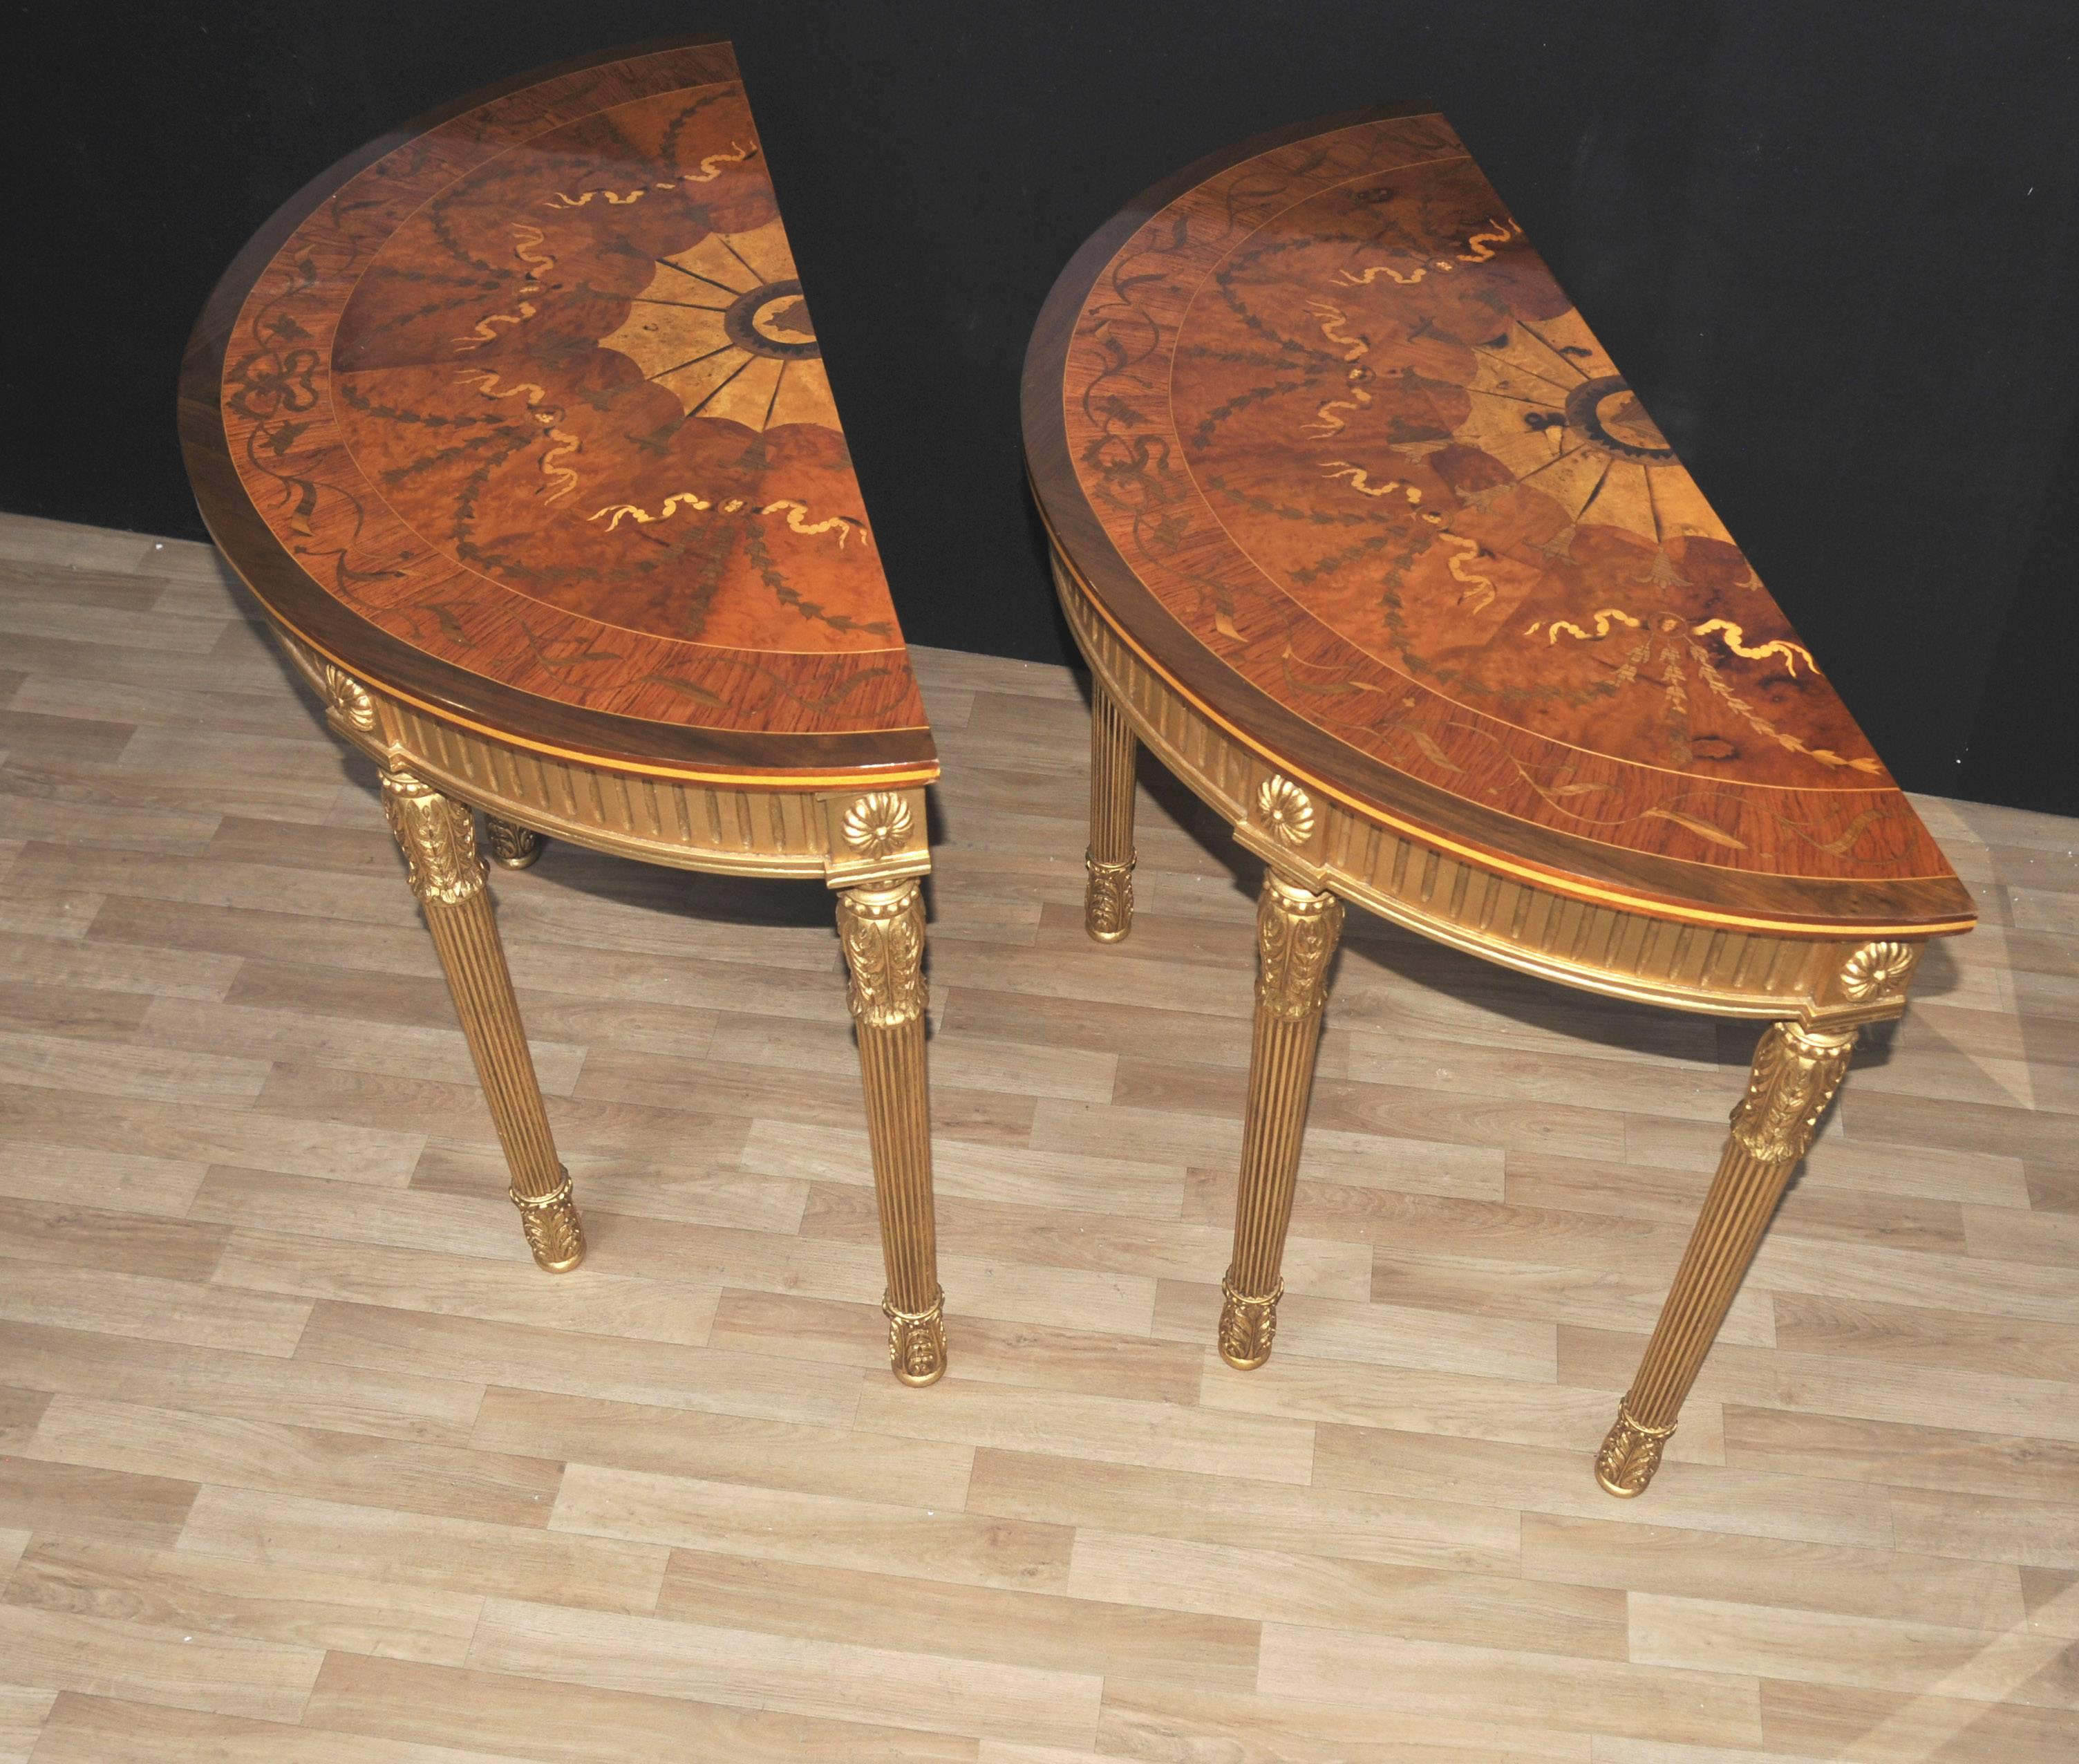 Contemporary Pair of Adams Regency Style Console Tables Demilune Marquetry Inlay Tops For Sale